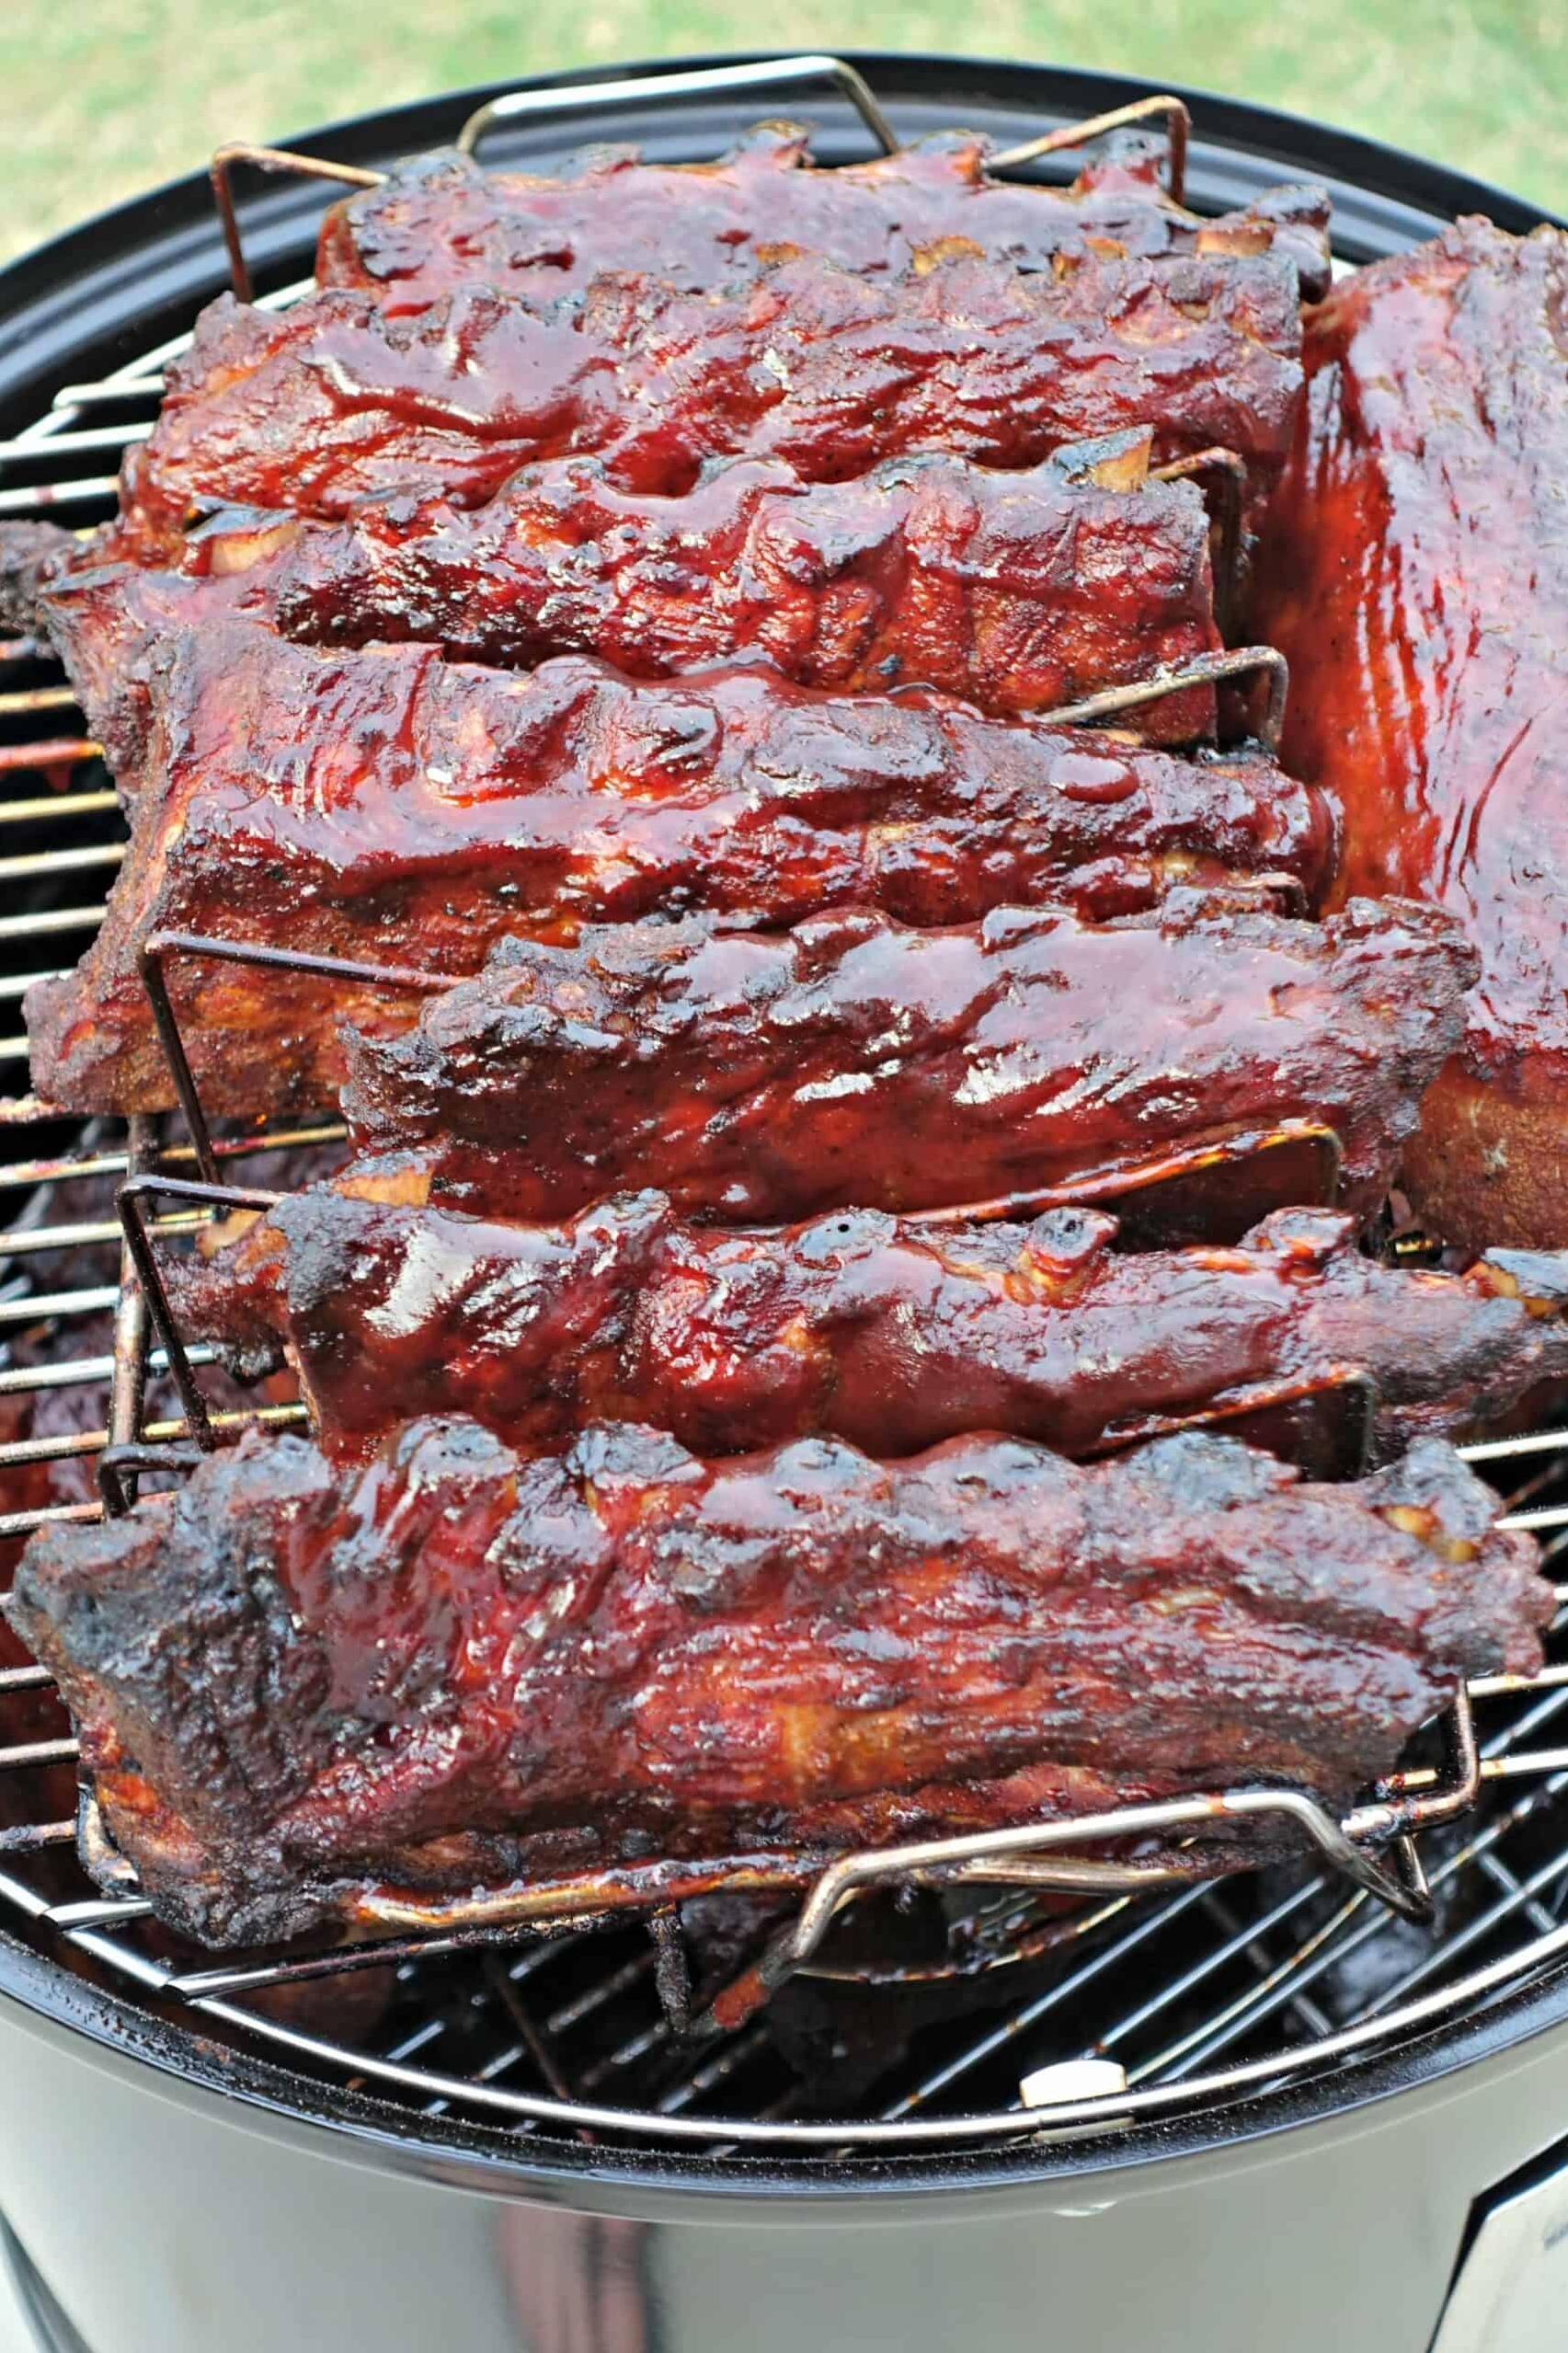  Juicy and tender baby back ribs smoked to perfection.